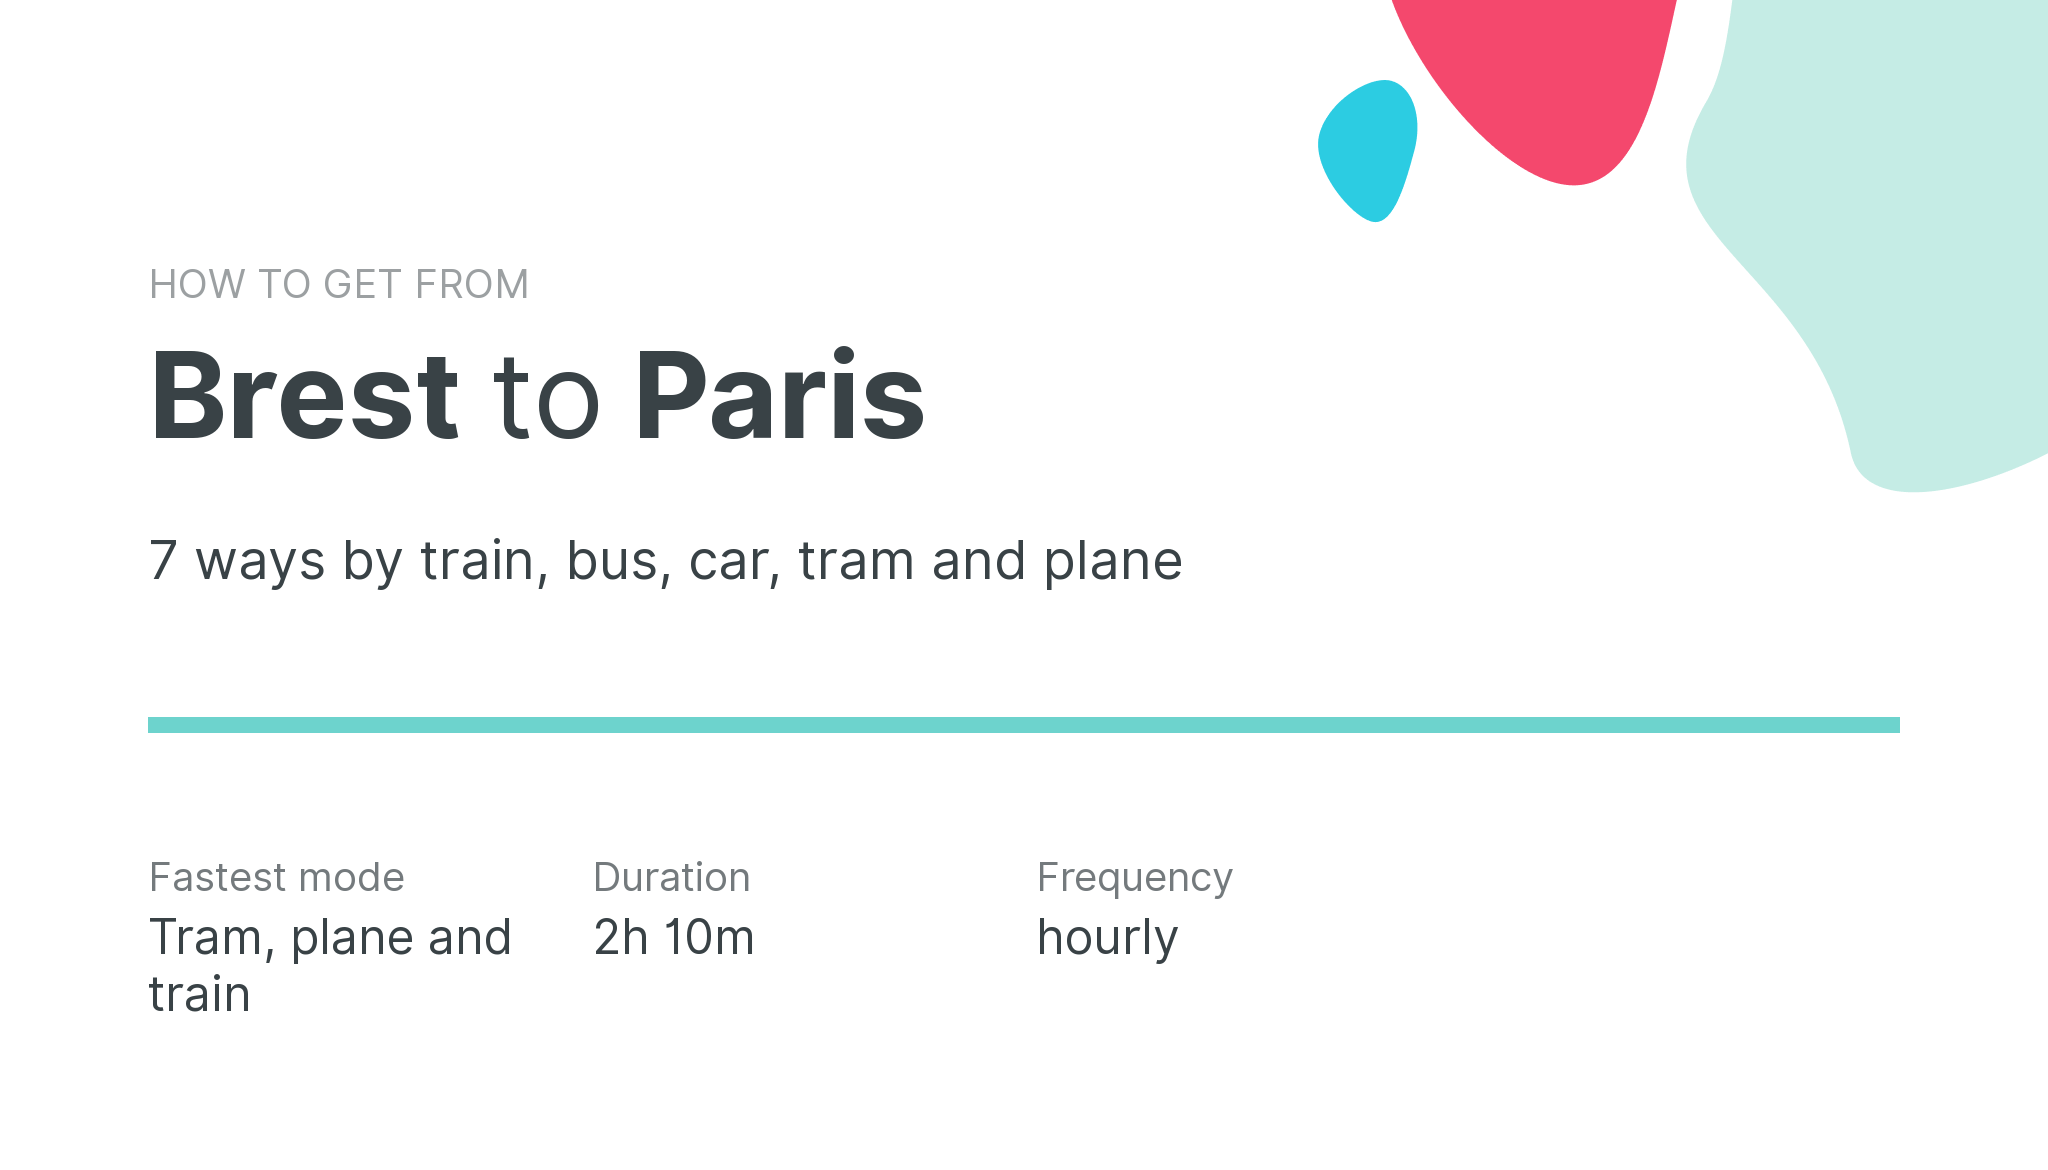 How do I get from Brest to Paris